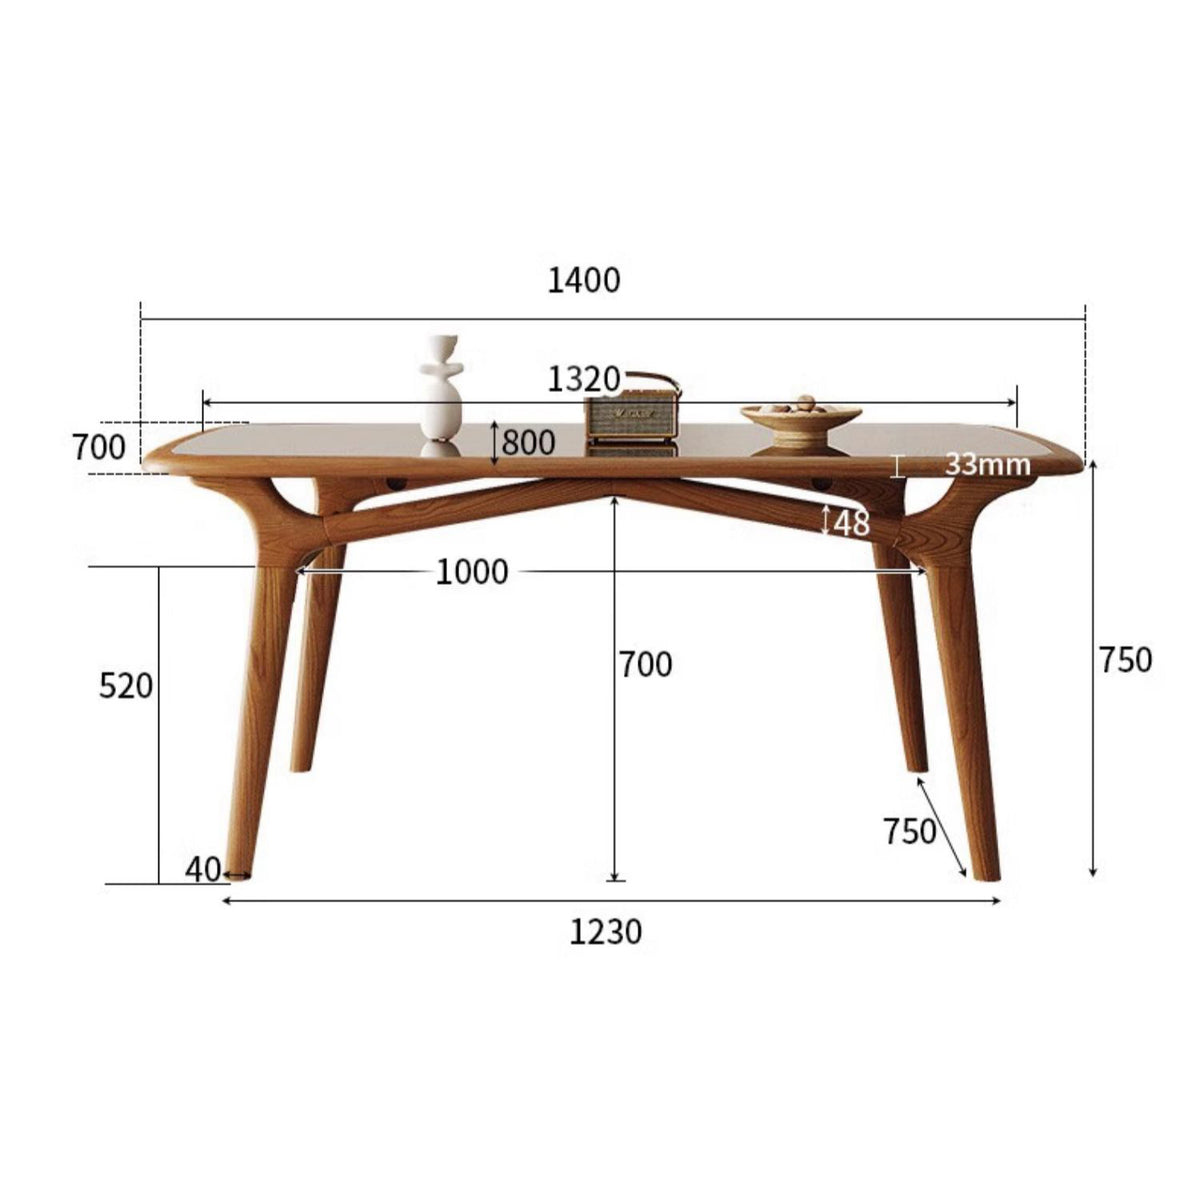 Premium Handmade Natural Ash Wood Dining Table - Brown Finish fmbs-014